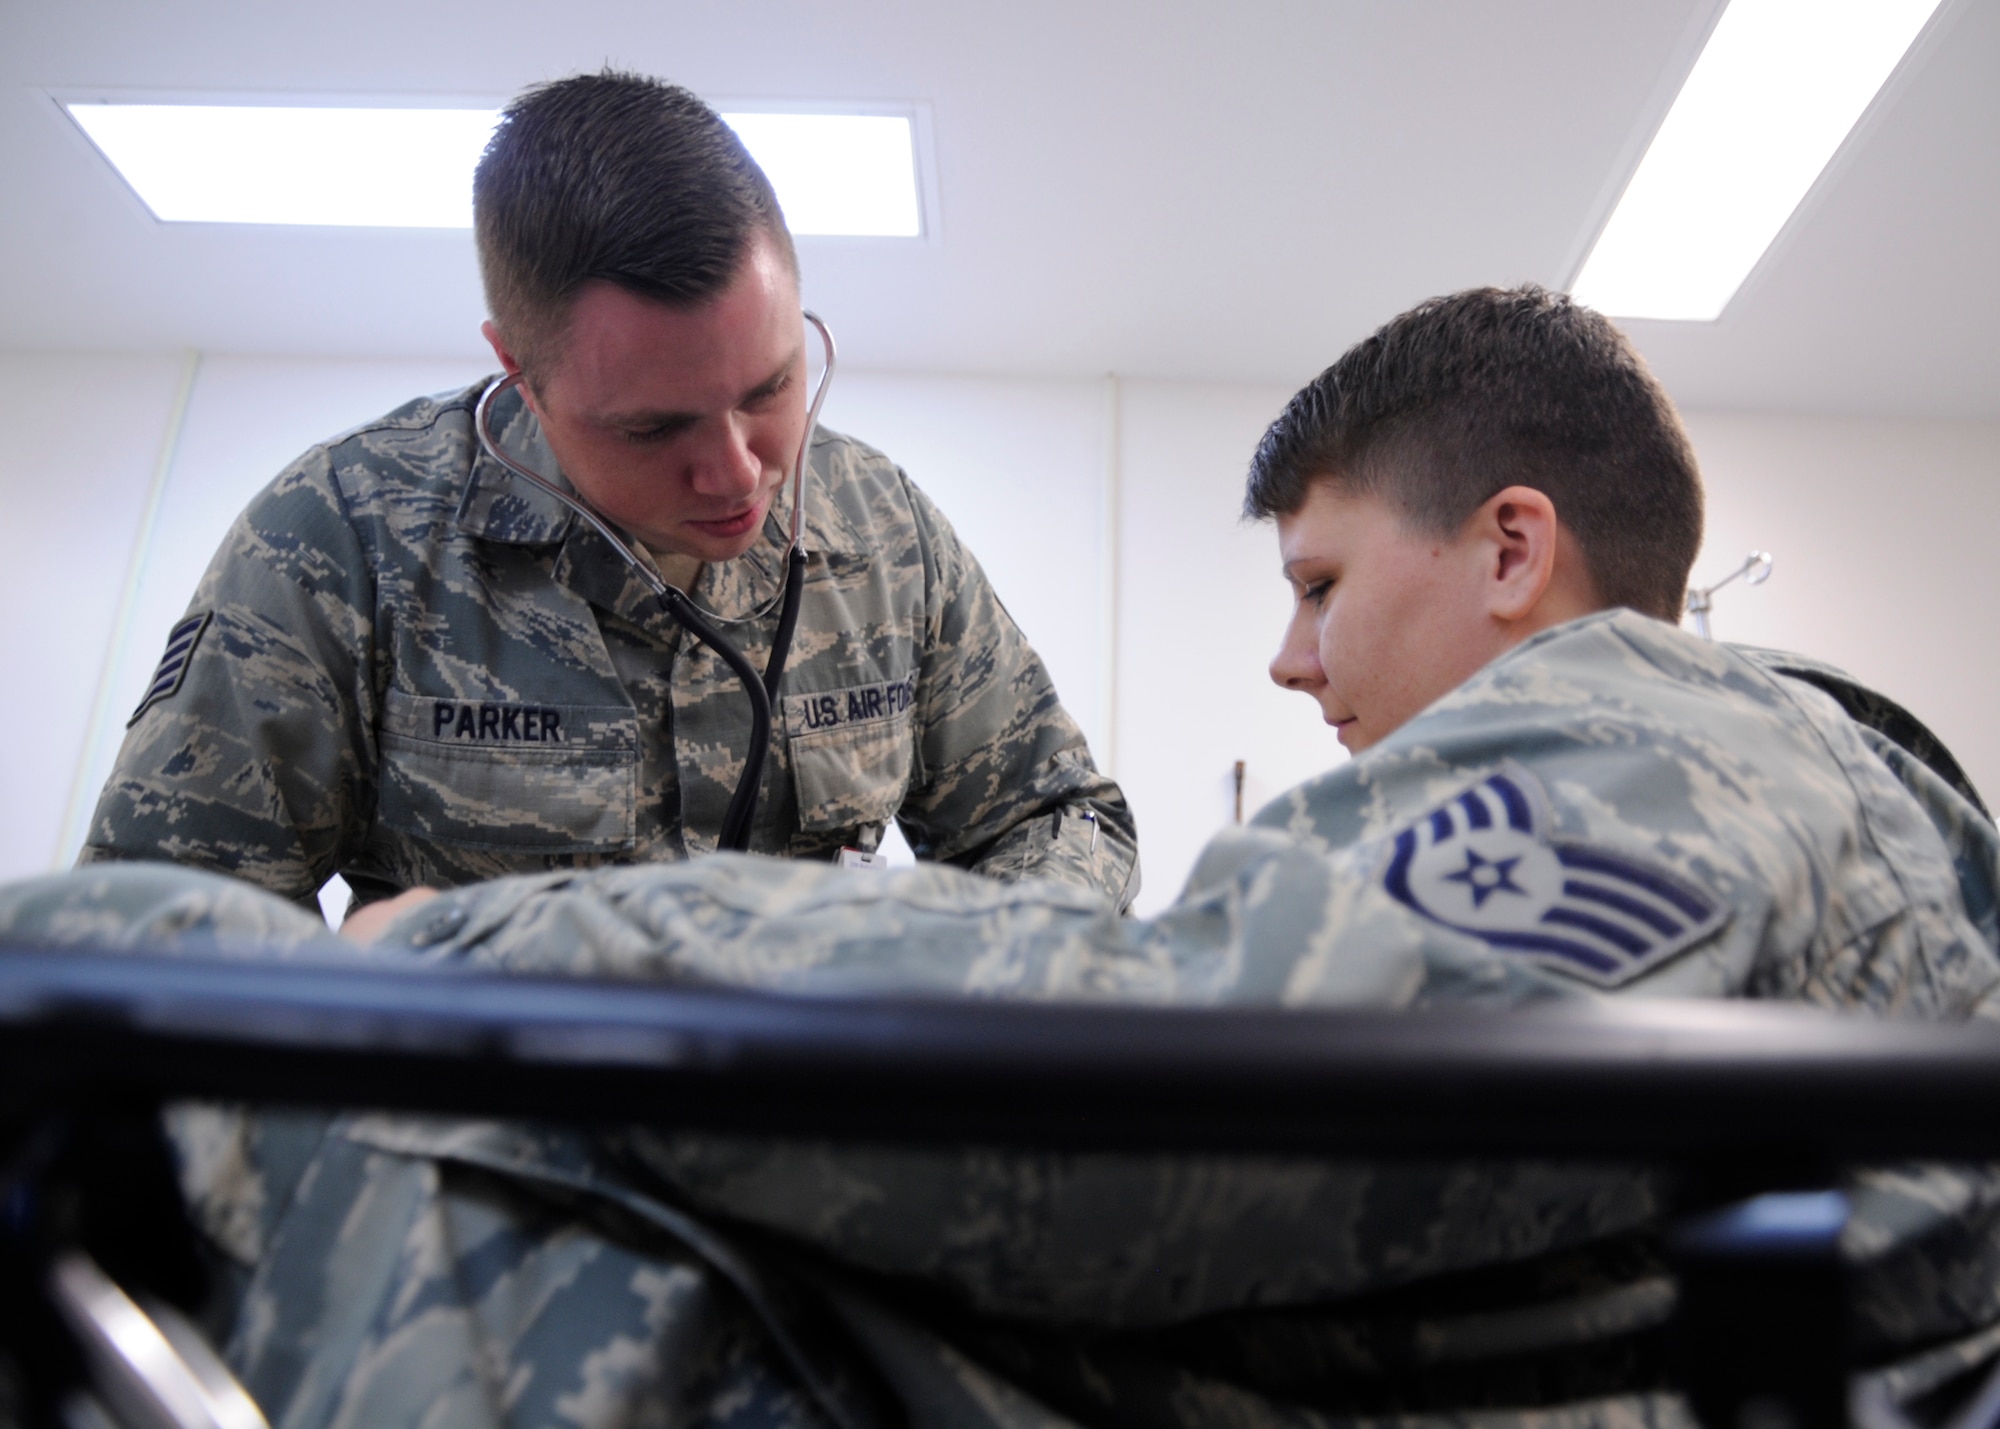 U.S. Air Force Staff Sgt. Jason Parker, 325th Aerospace Medical Squadron medical service craftsman, checks the pulse of a coworker during a training exercise in Tyndall Air Force Base medical clinic, Fla., Oct. 25, 2016. Parker was selected as an outstanding performer in the 325th AMDS by his leadership. (U.S. Air Force photo by Senior Airman Solomon Cook/Released) 